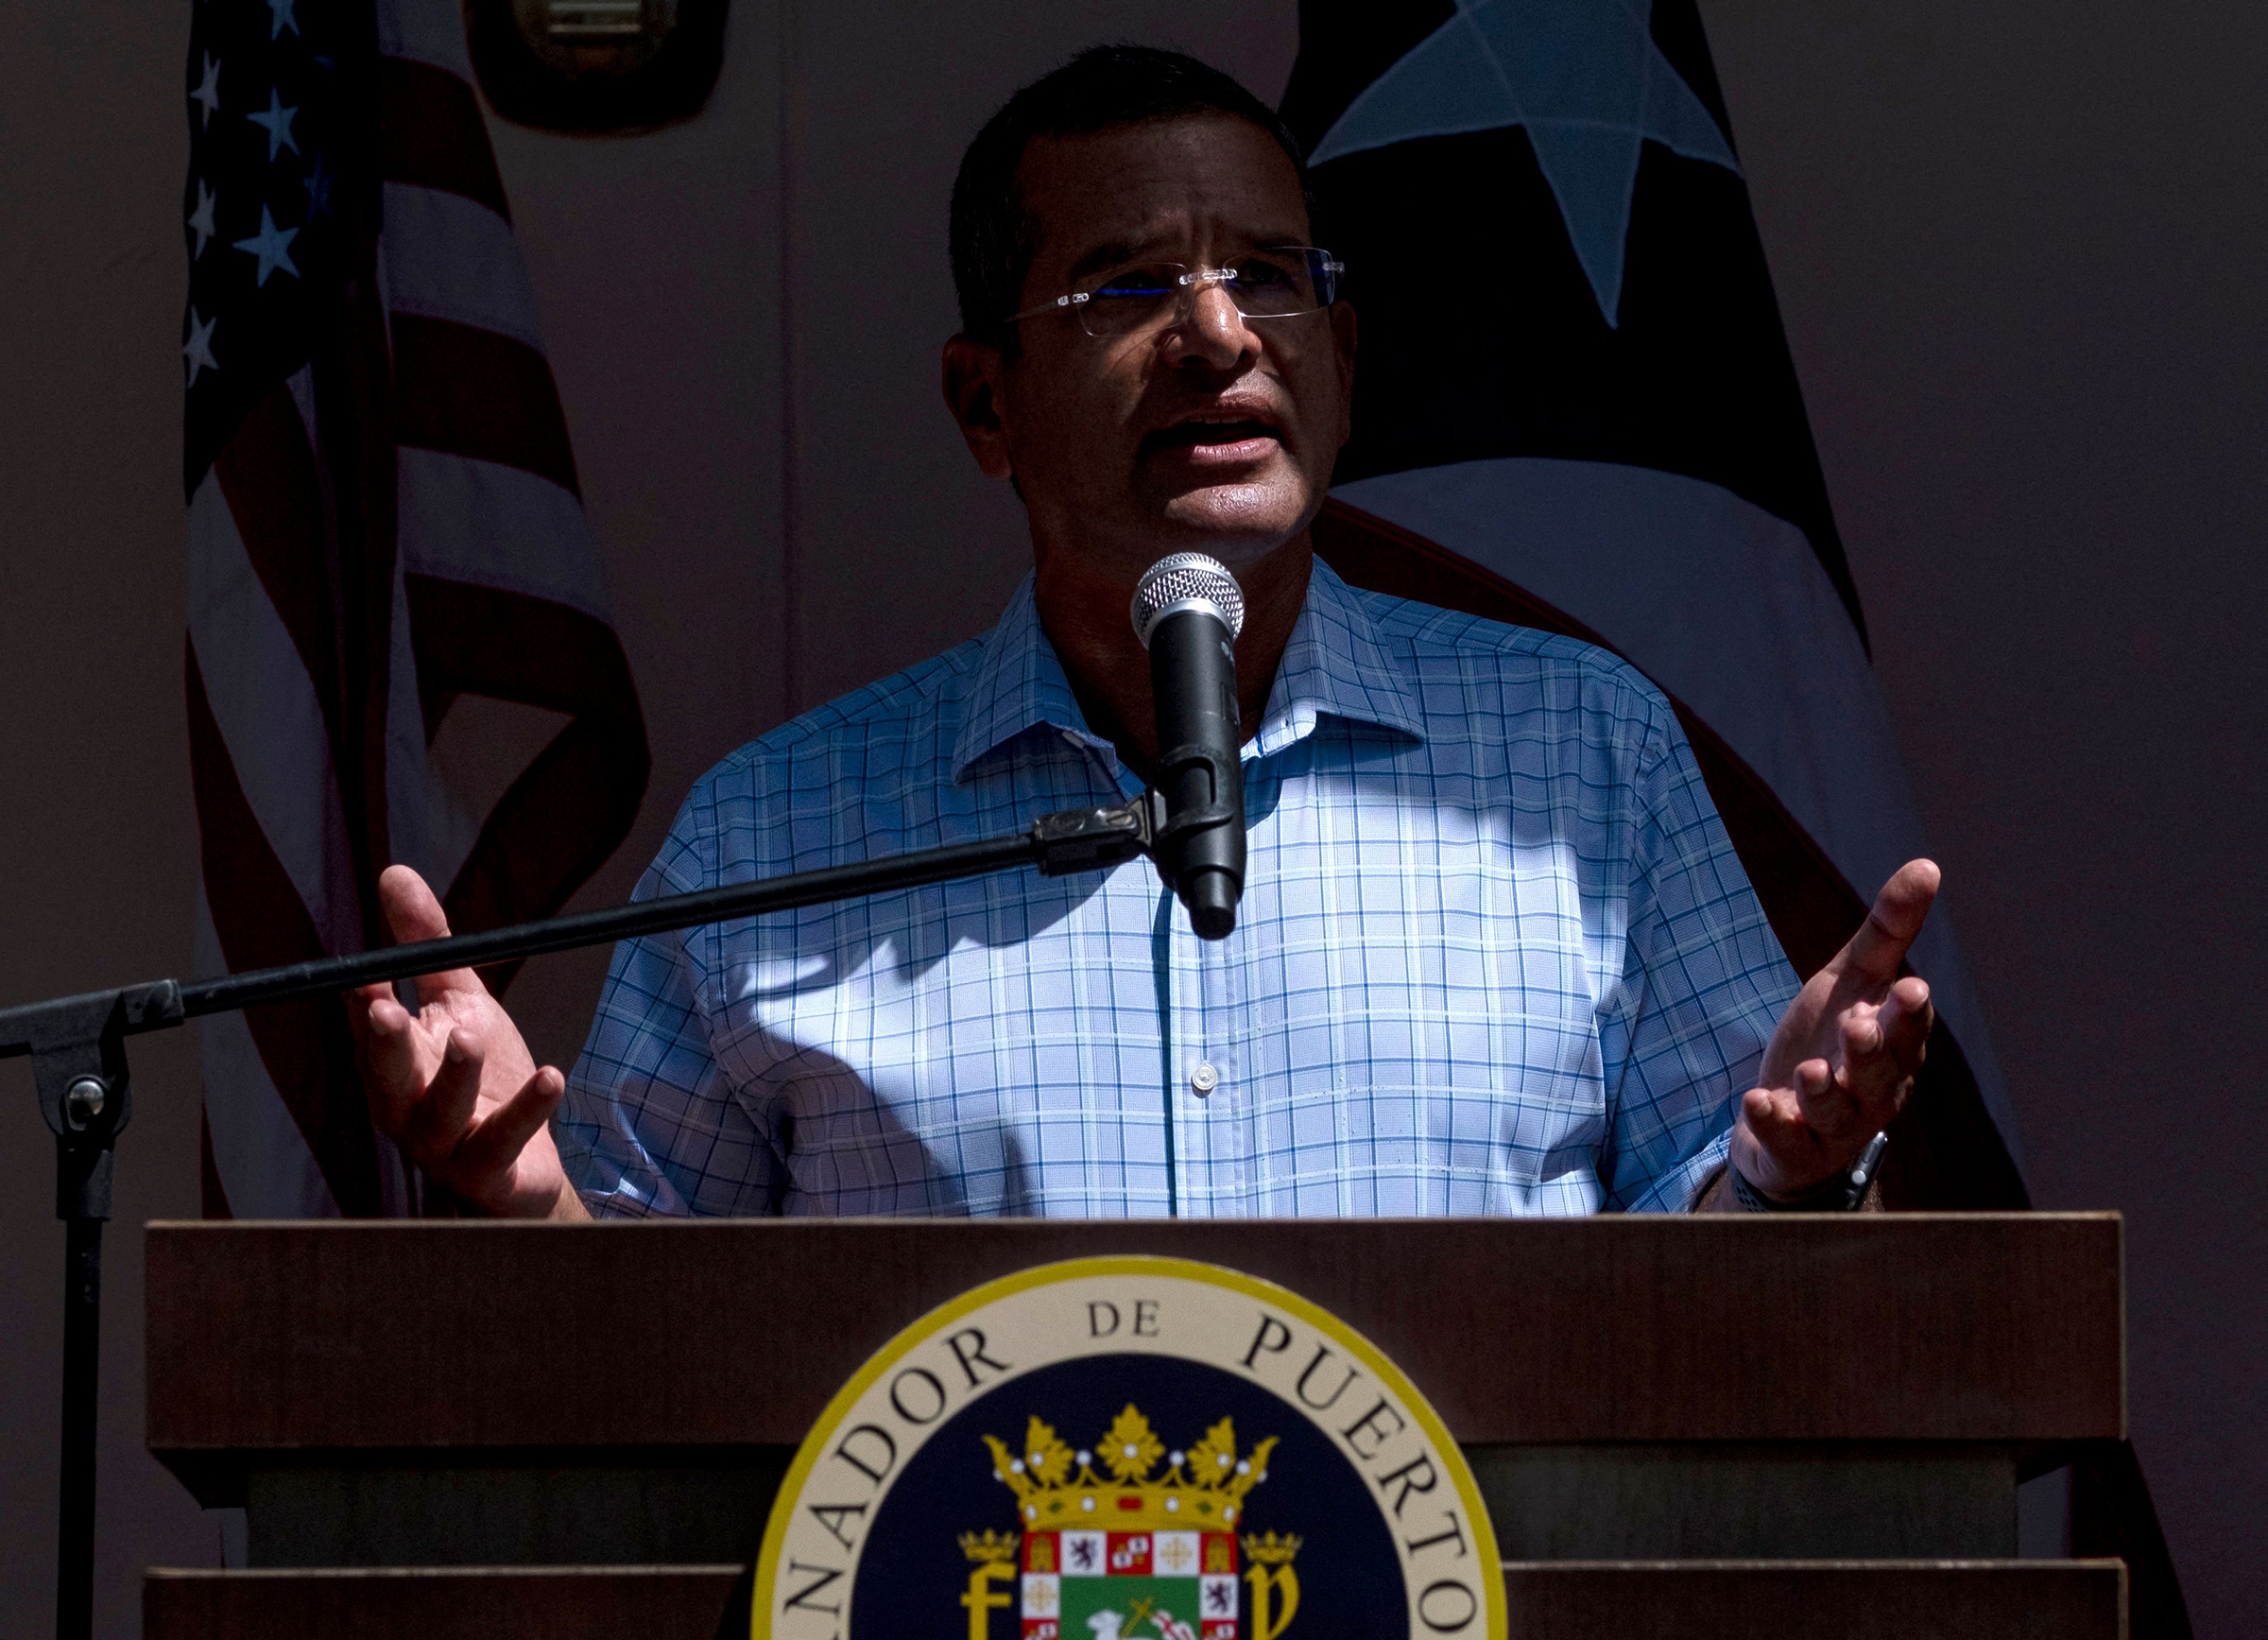 Puerto Rico's Governor Pedro Pierluisi speaks at a press conference at a Puerto Rico National Guard vaccination center on March 10.